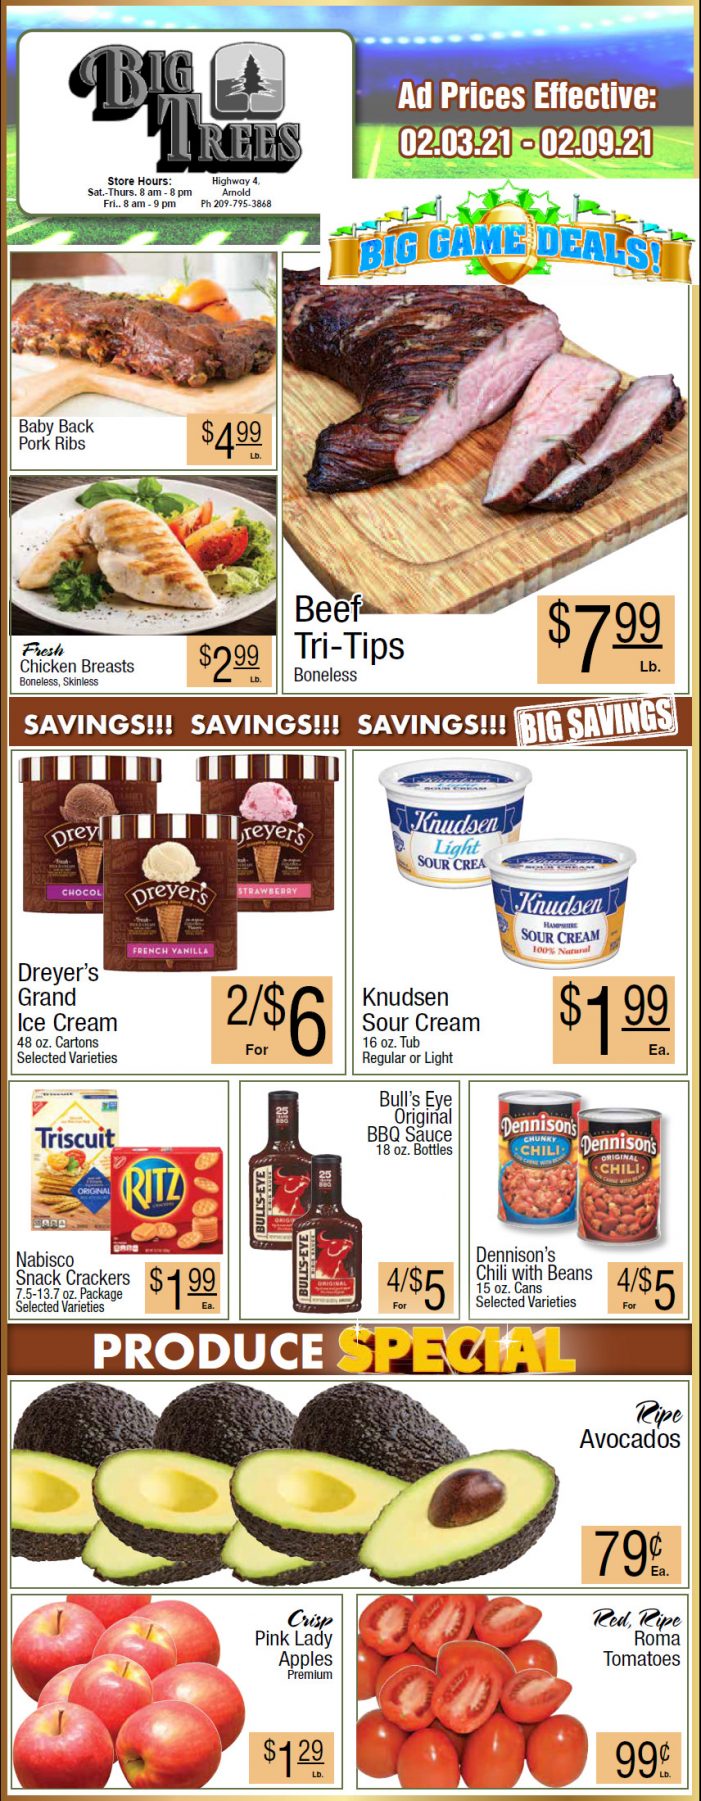 Big Trees Market Weekly Ad & Grocery Specials Through February 9th